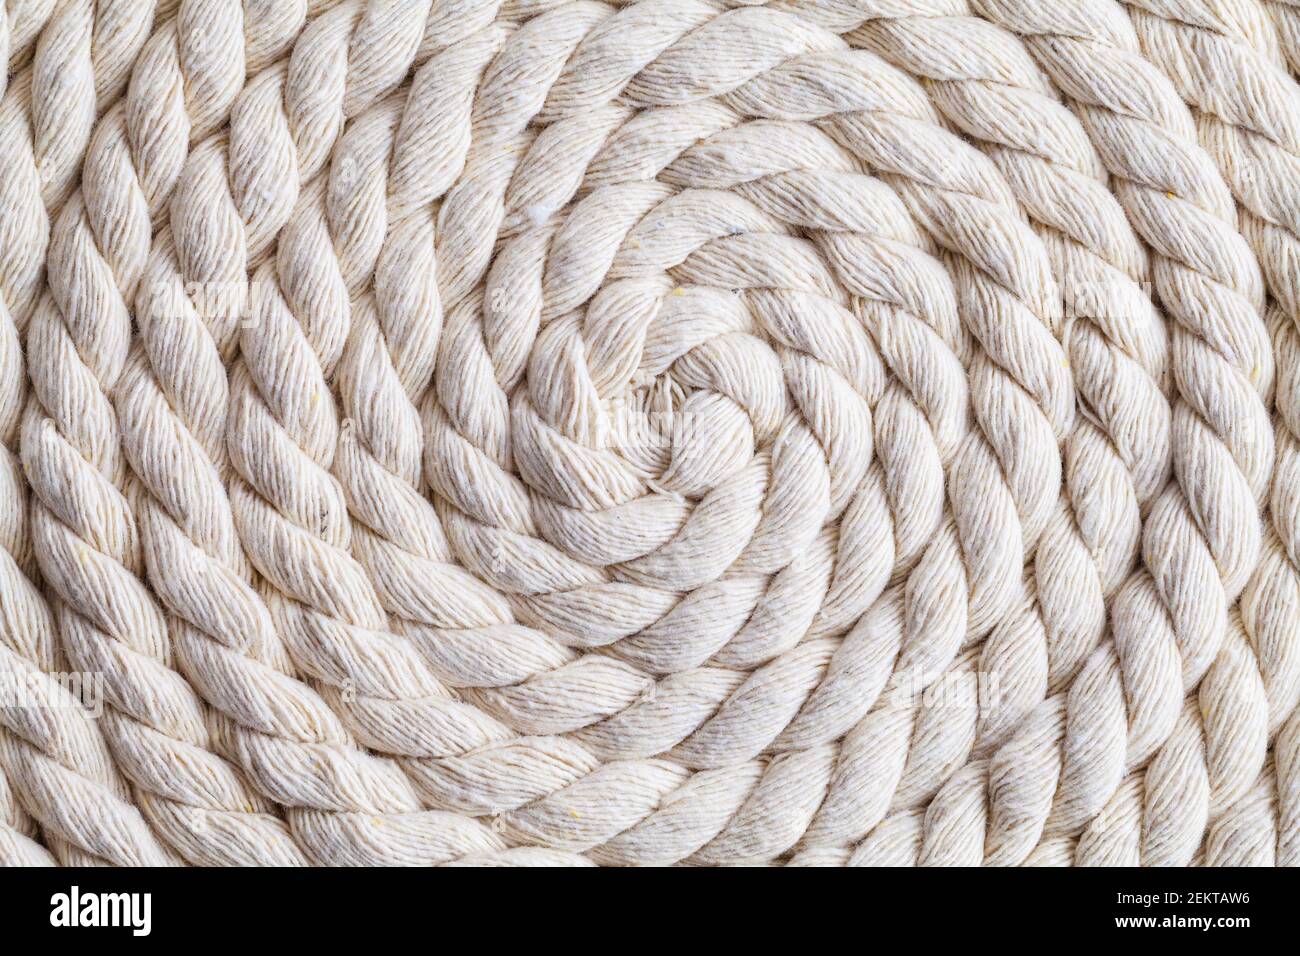 Sprial Twisted Hemp Rope Curled in a Spiral Background. Stock Photo